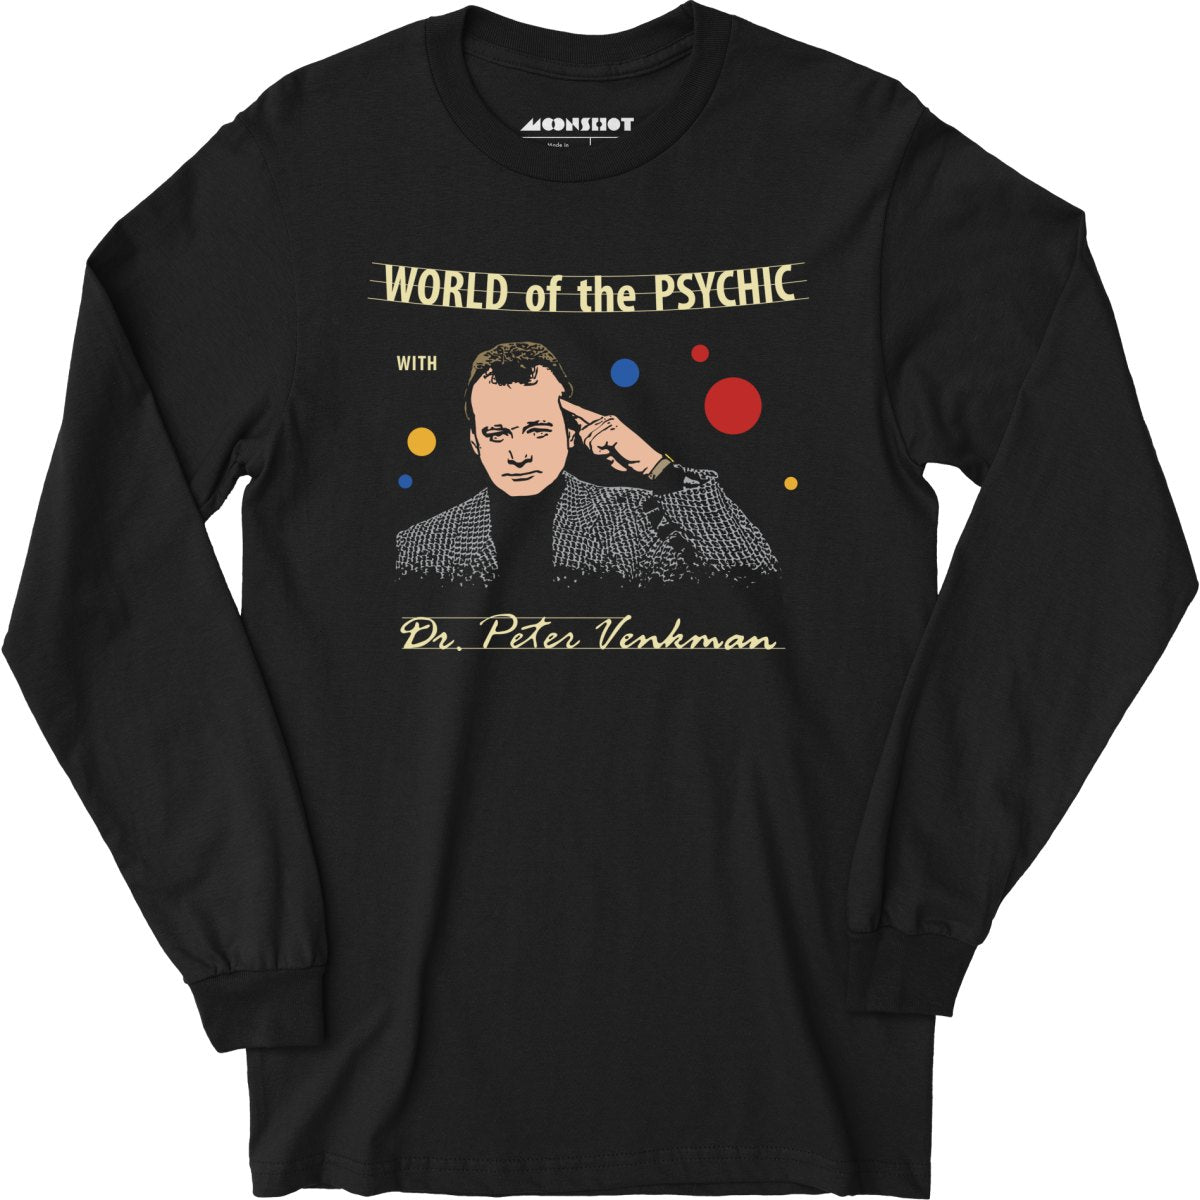 World of the Psychic with Dr. Peter Venkman - Long Sleeve T-Shirt